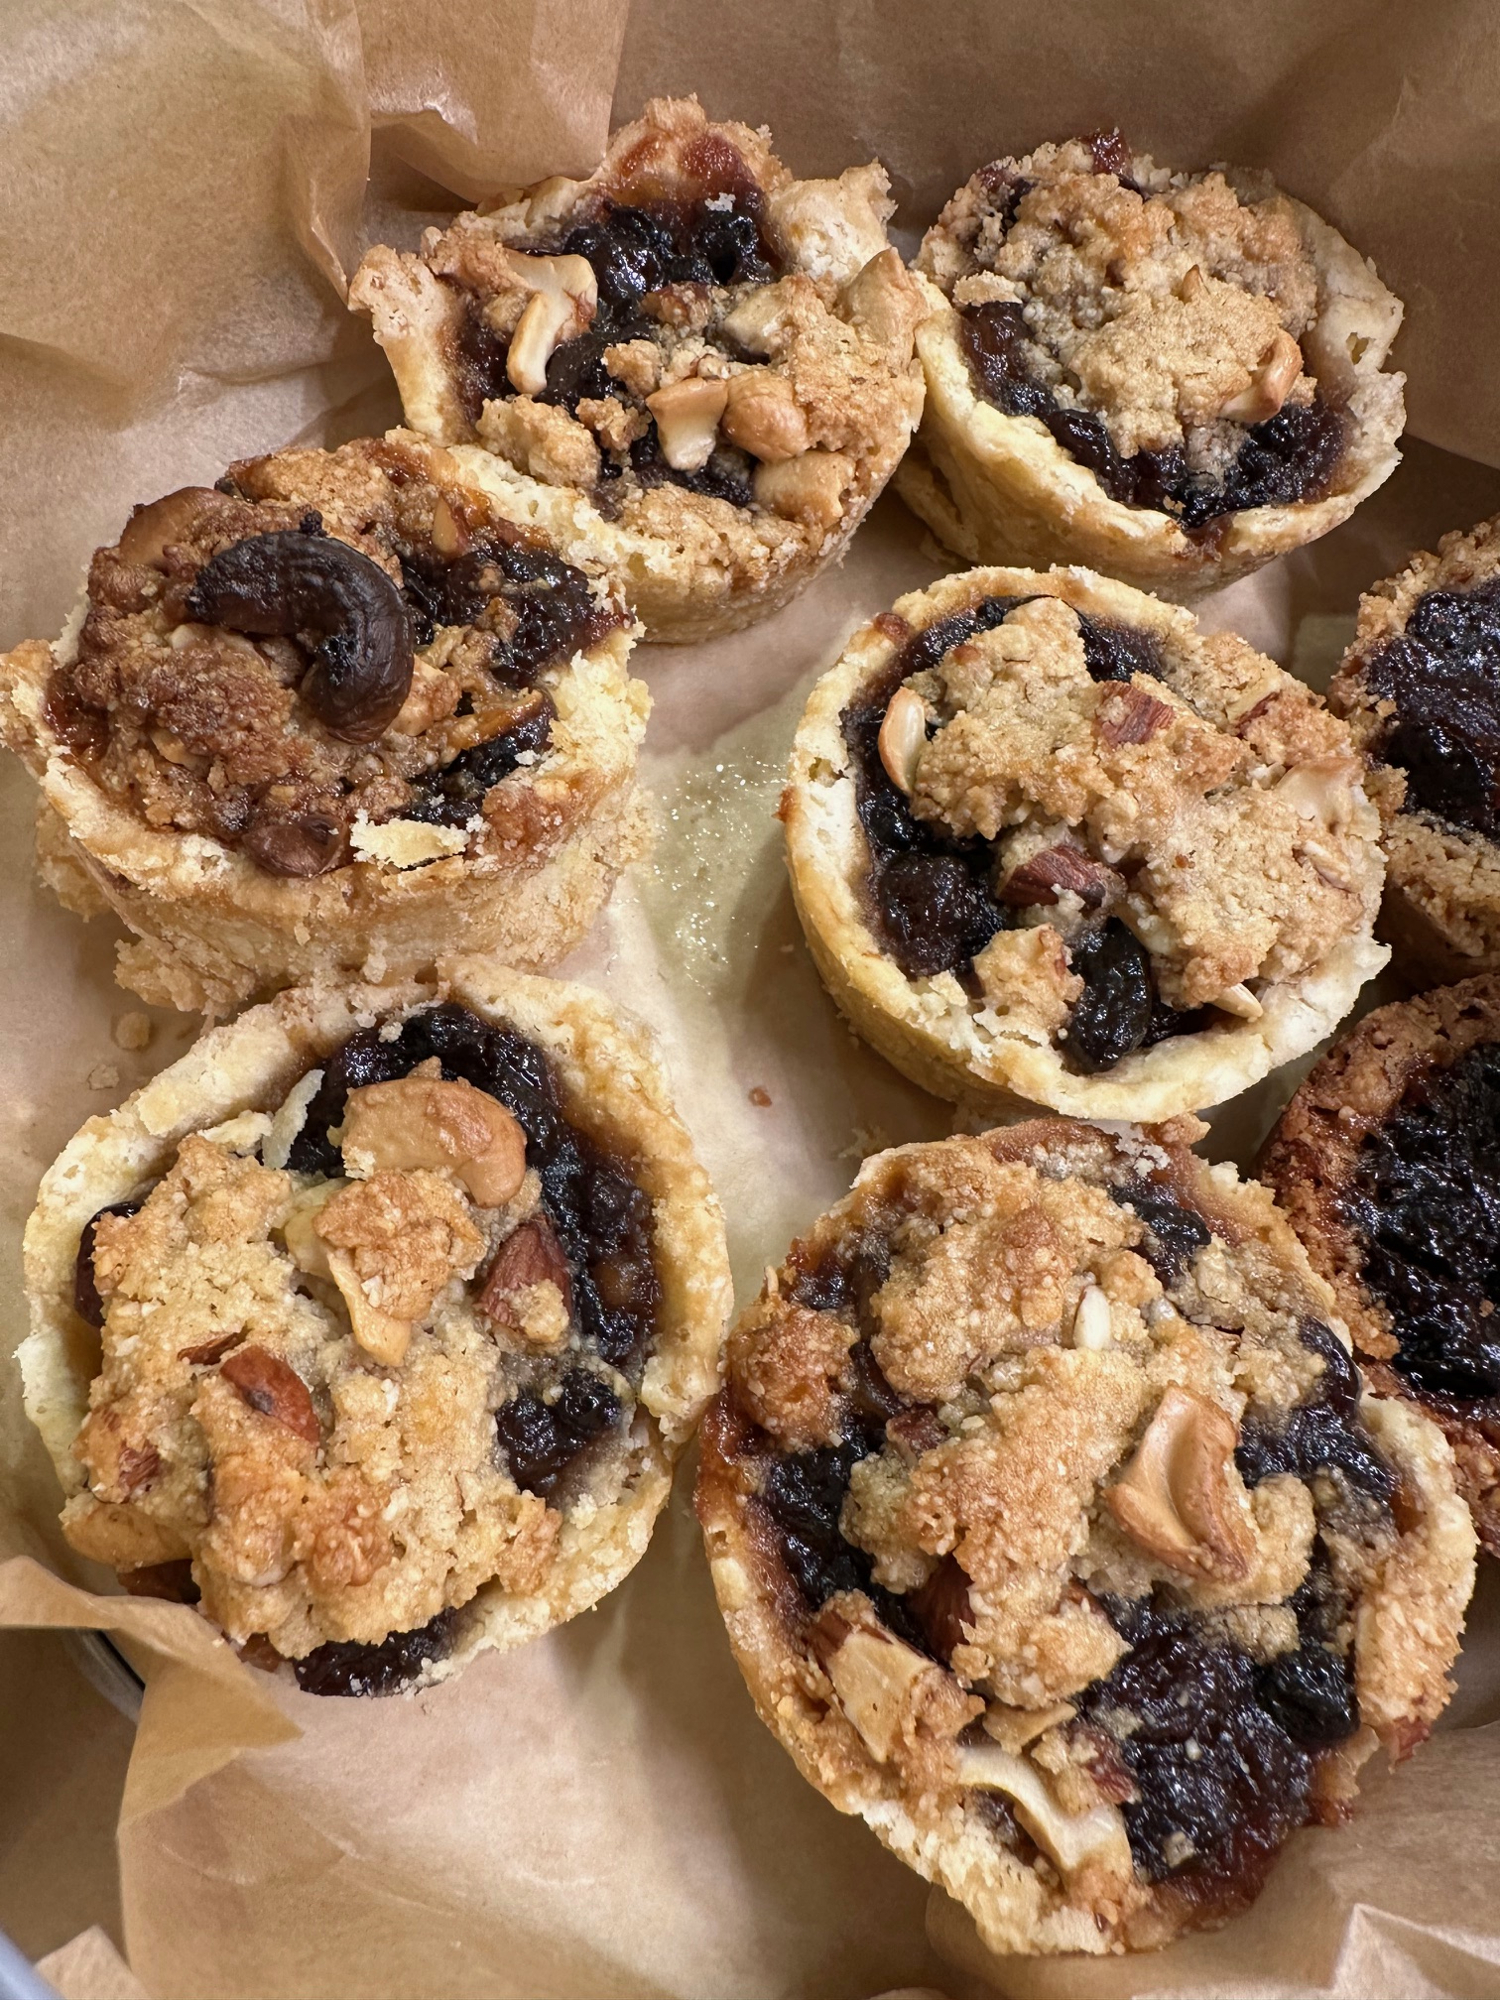 Gluten free crumble top mince pies. Photo by A.Howse